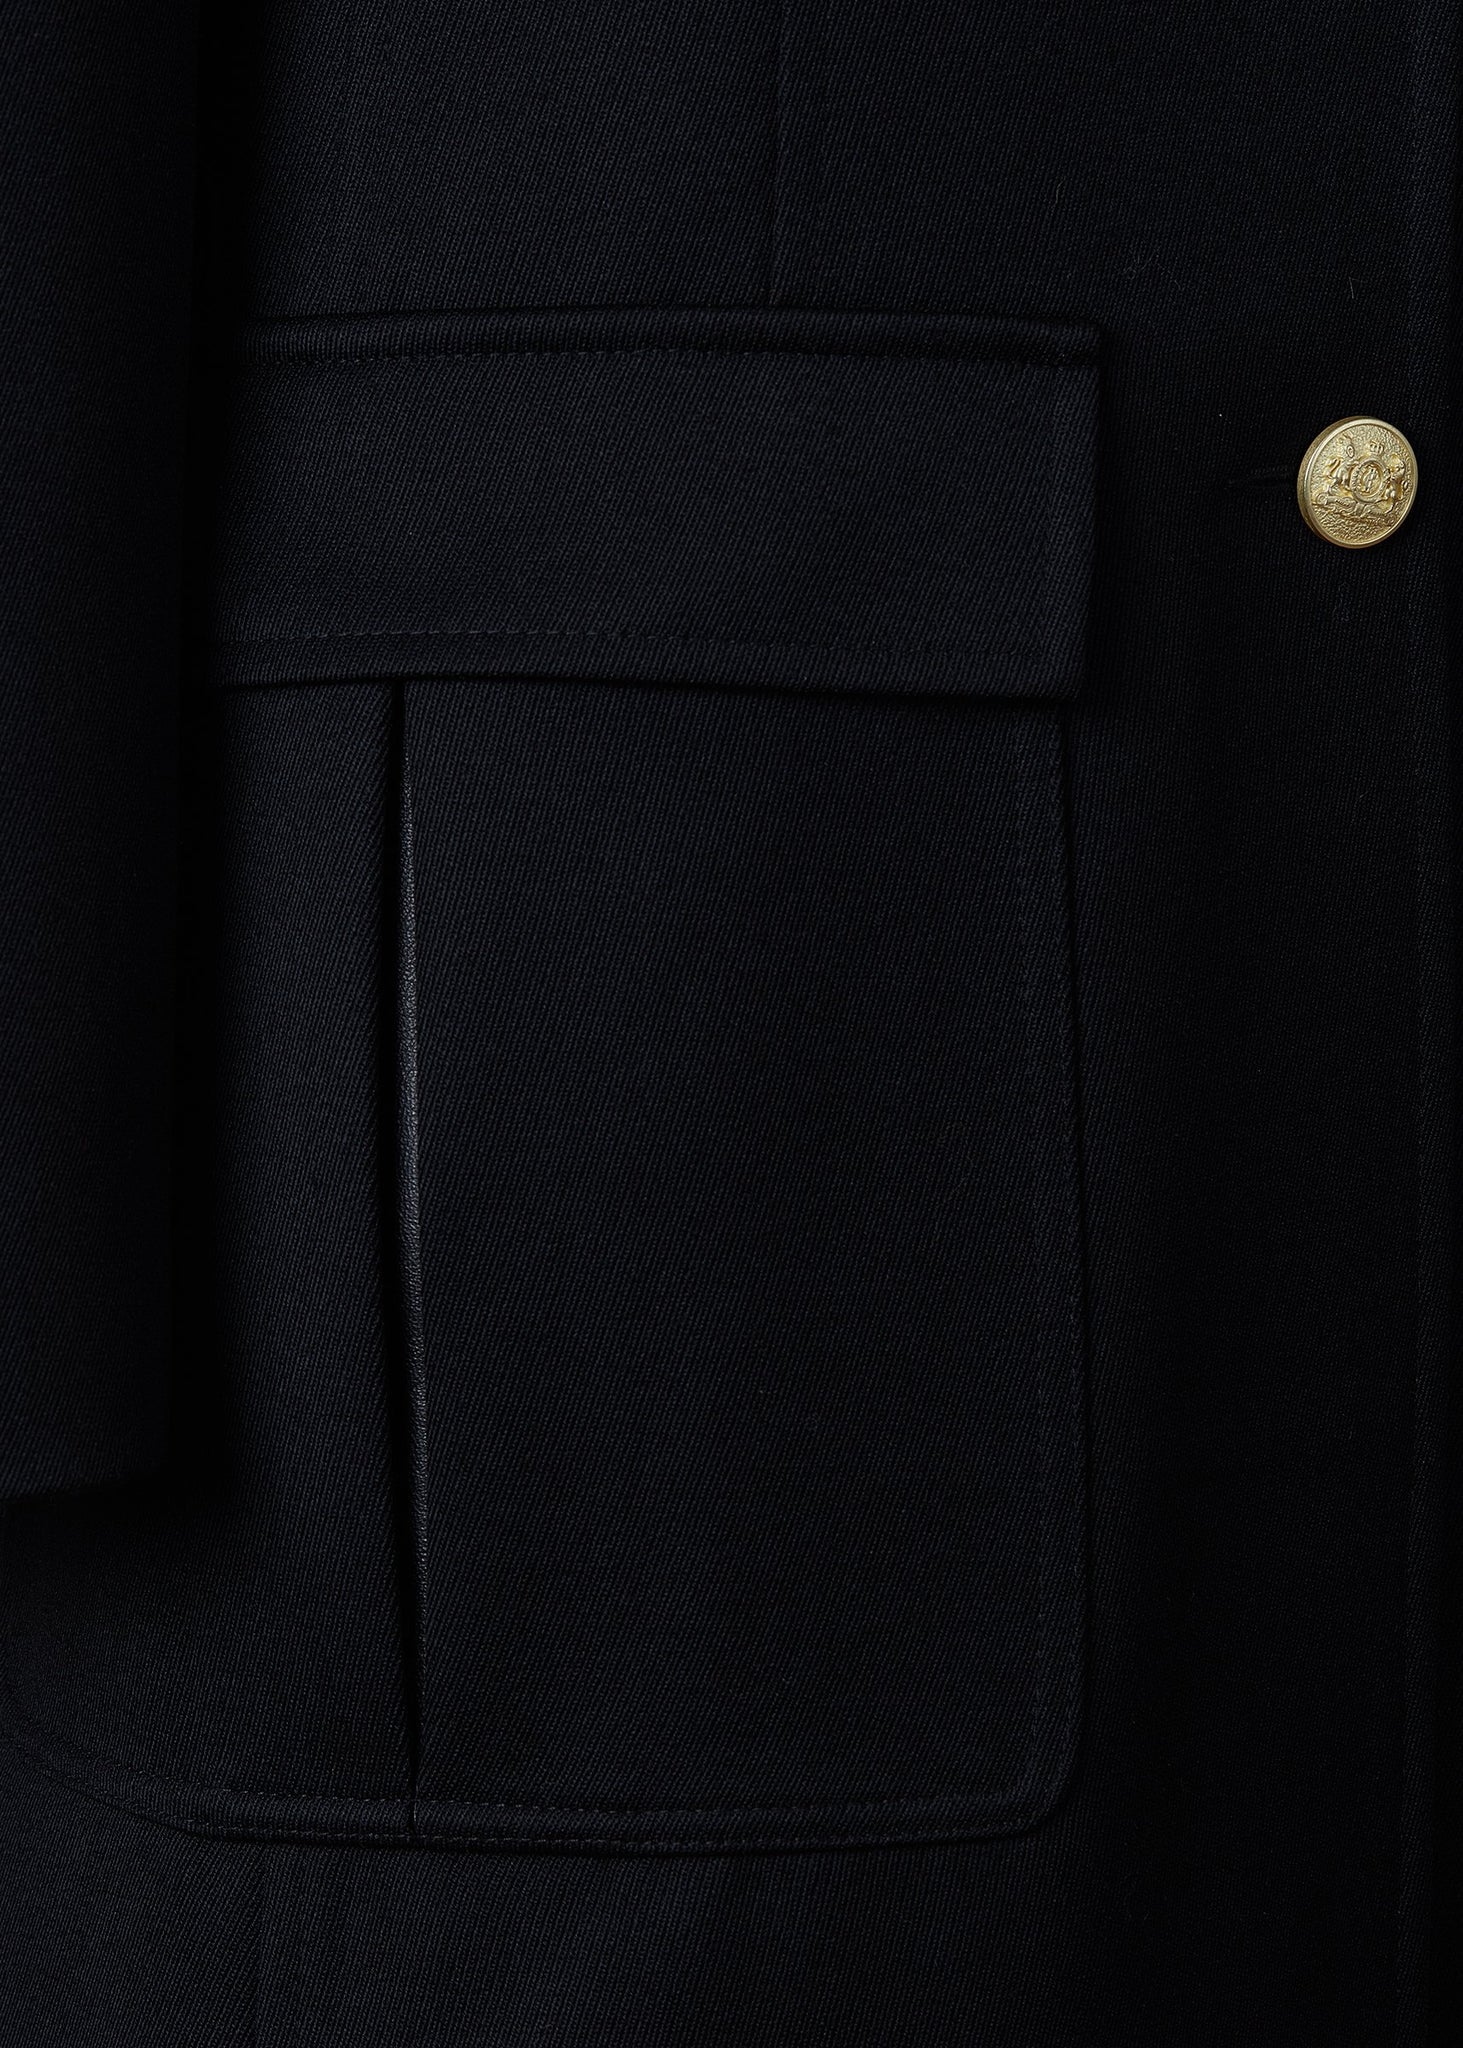 pocket detail on relaxed fit single breasted blazer breasted blazer in black with patch pockets and tonal black leather elbow patches and collar